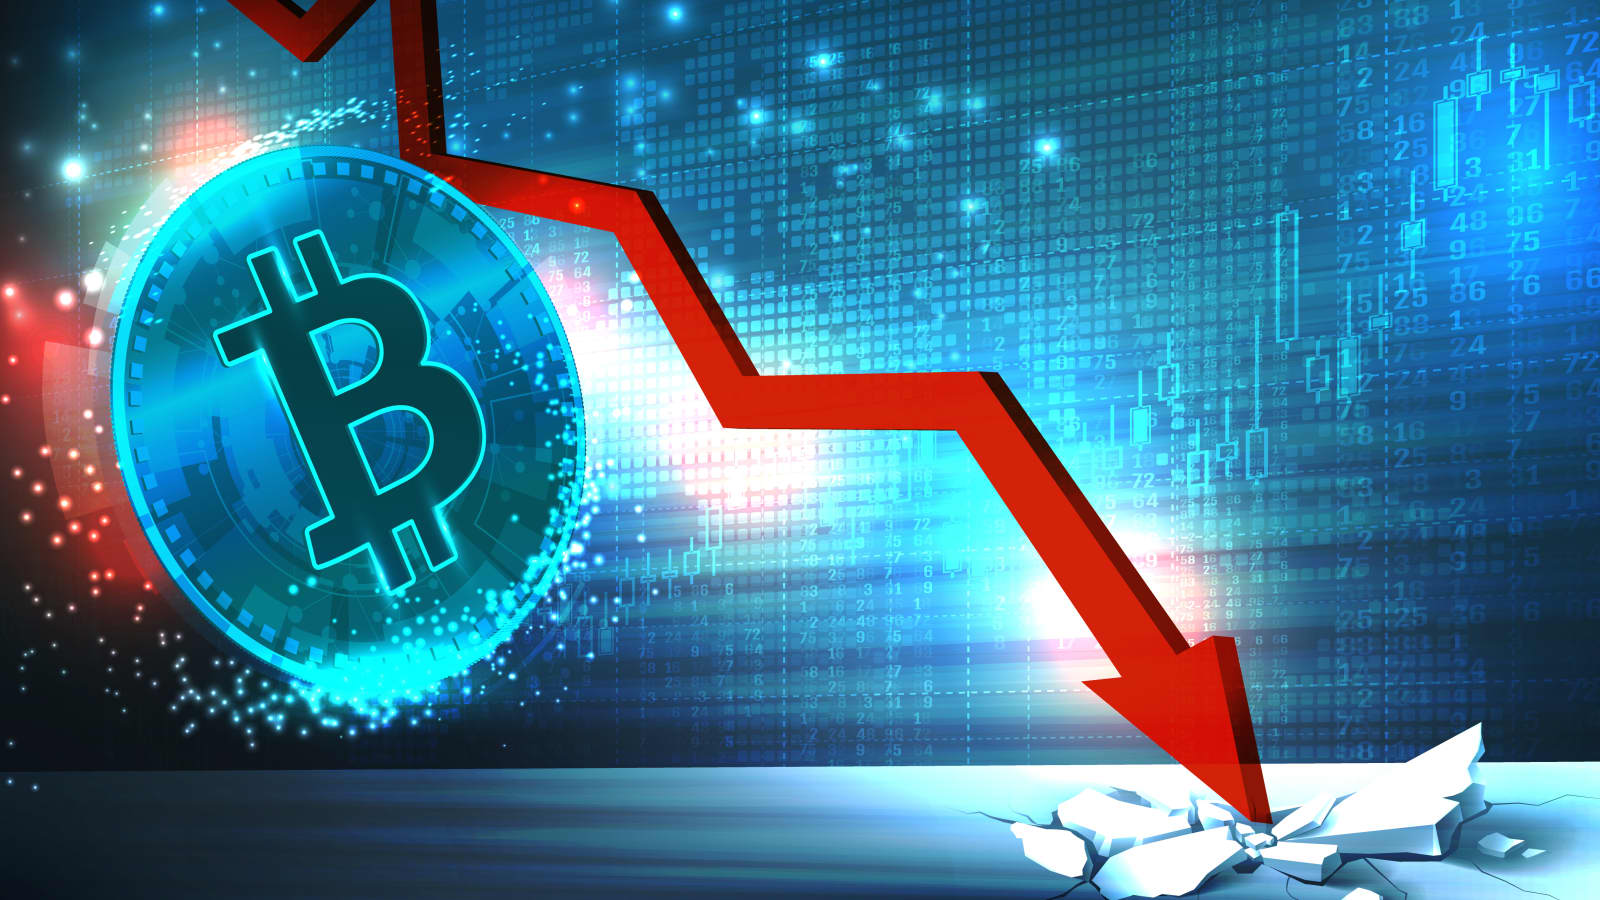 bitcoin lost over 60% of its value in 2022